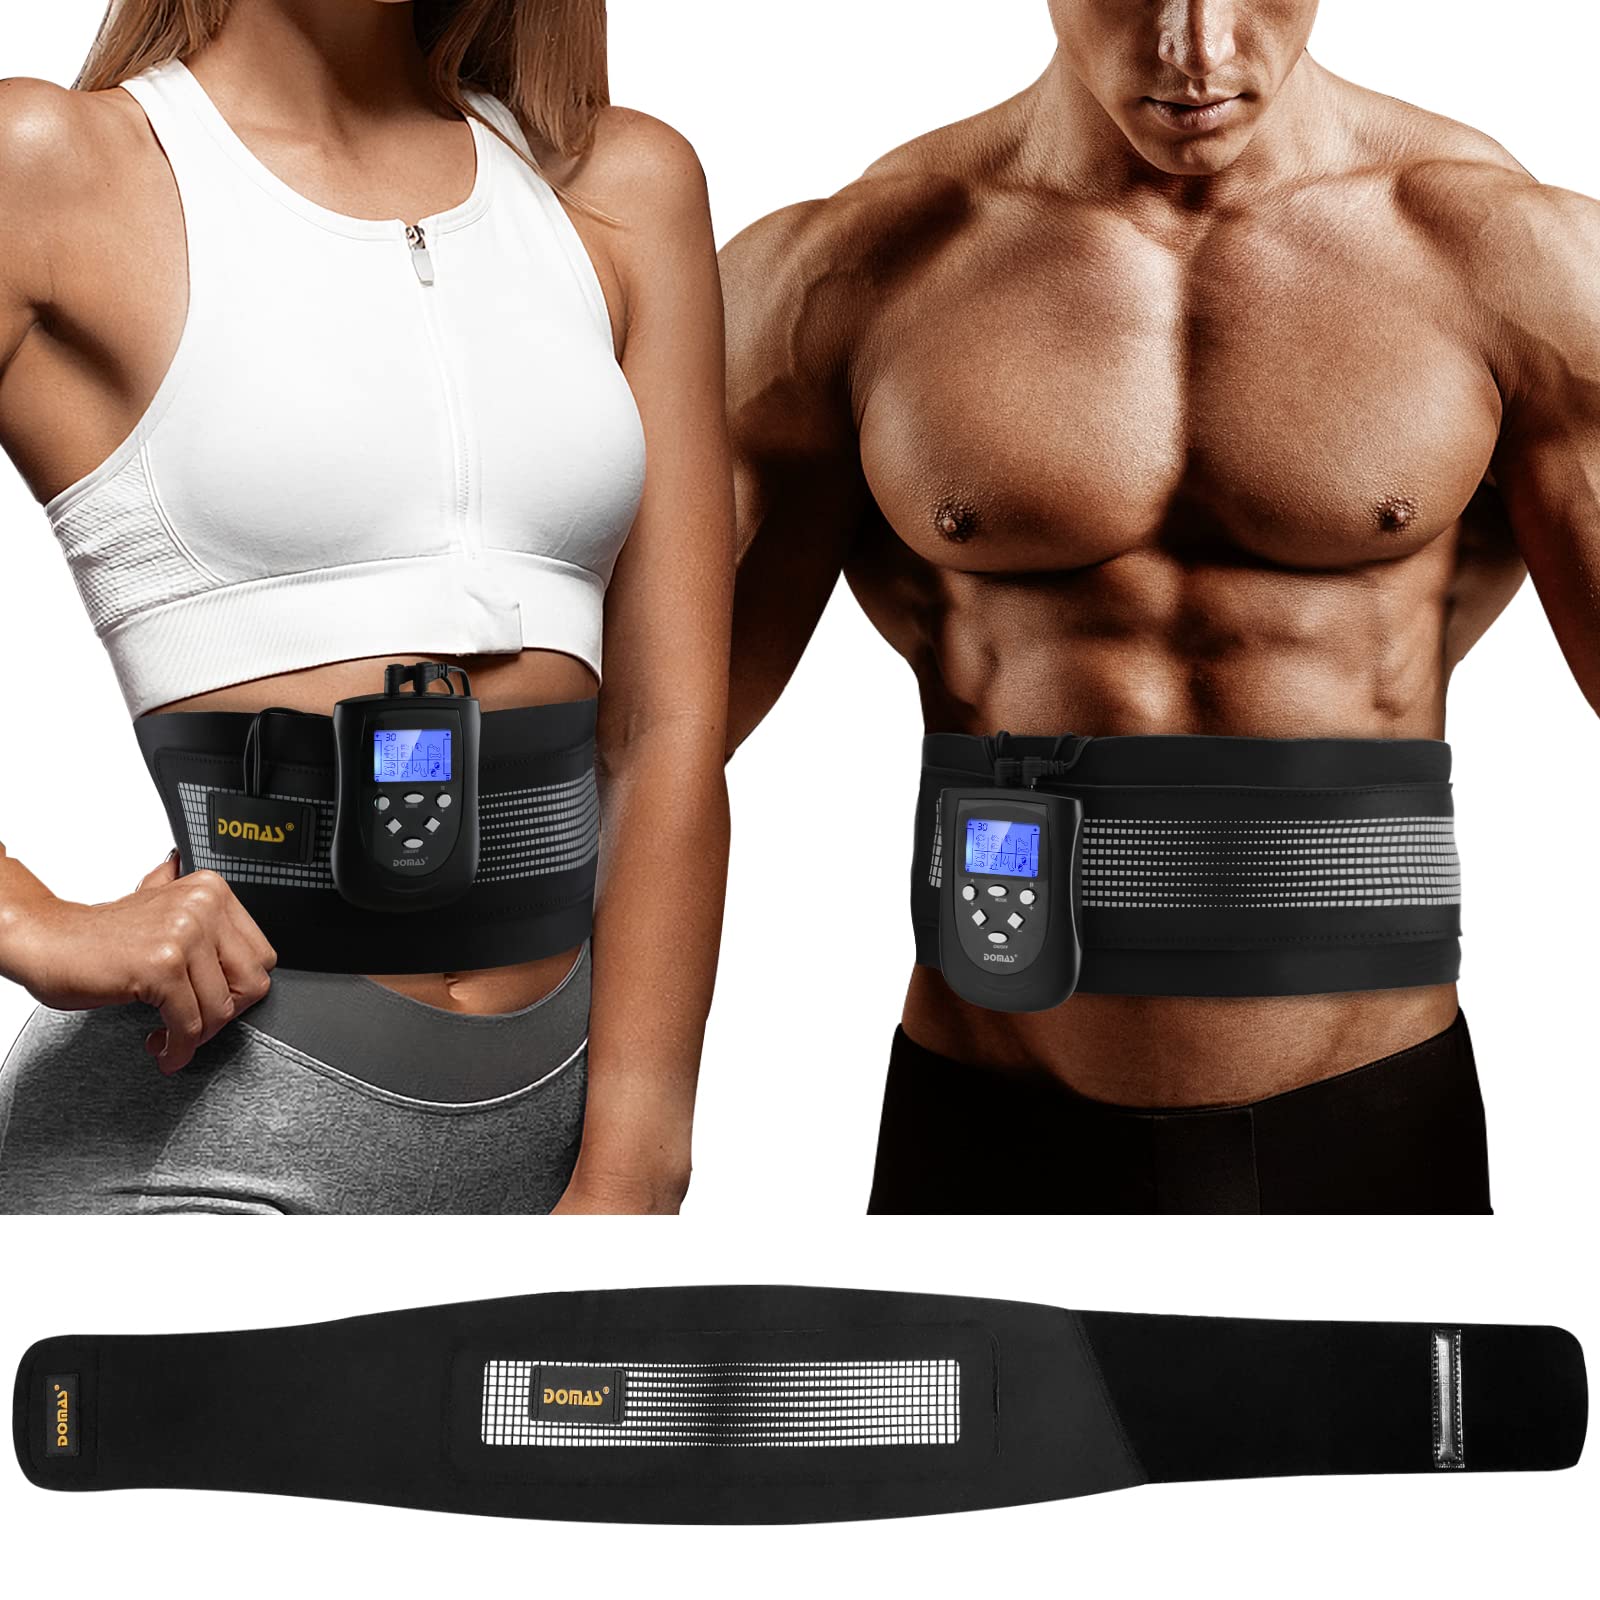 Electronic Muscle Stimulator ABS Stimulator, Rechargeable AB Stimulator  Muscle Toner, Fitness Waist Belt Home Office Workout Equipment for Men Women